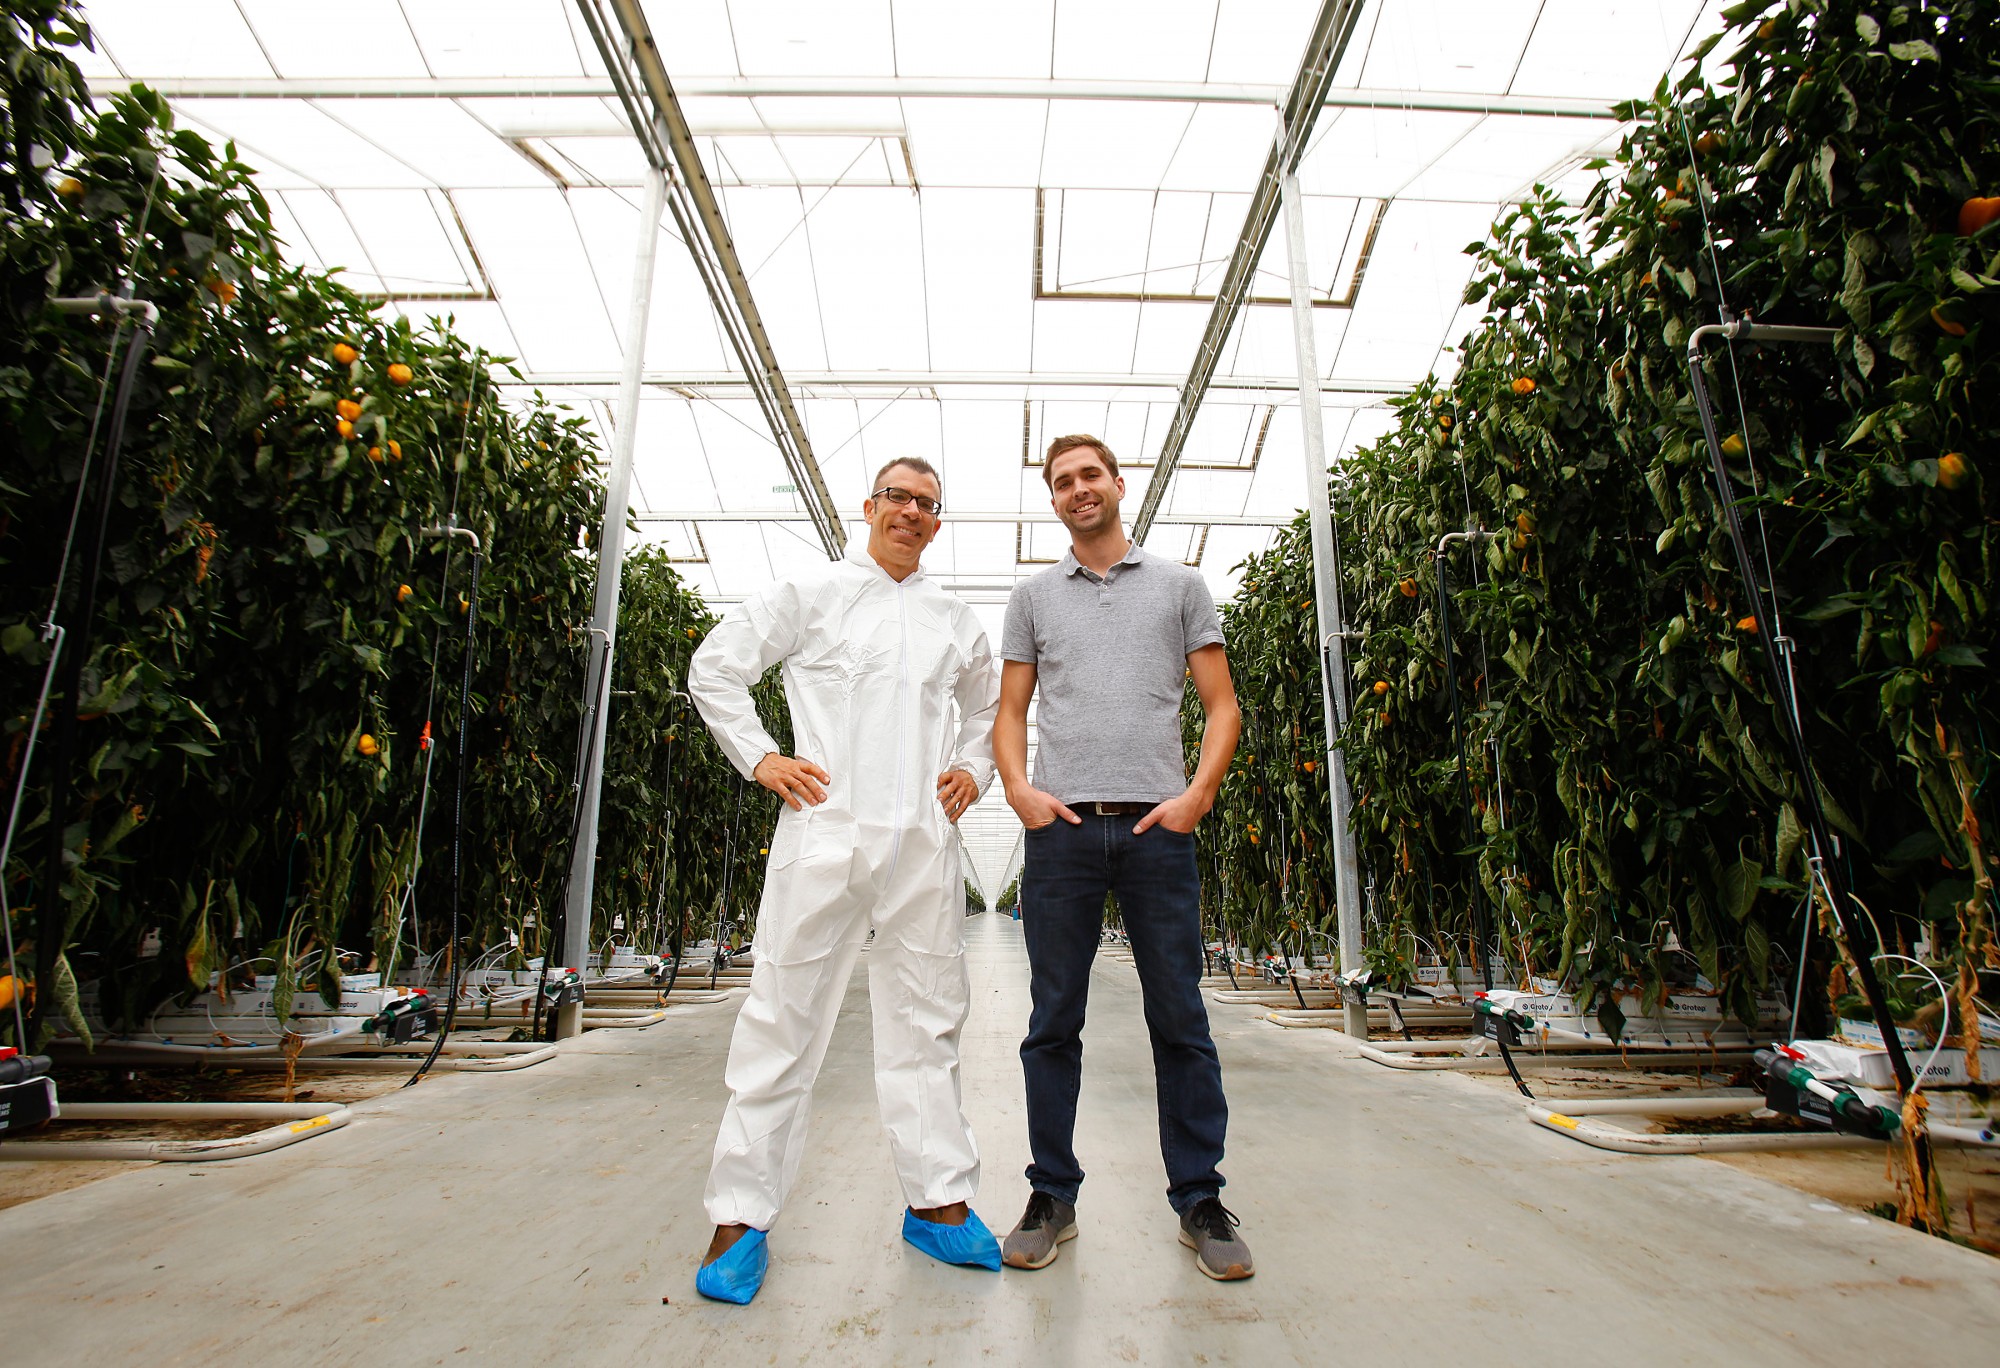 Dr. Rupp Carriveau (L) and Lucas Semple (R) are pictured at an Under Sun Acres greenhouse 2.